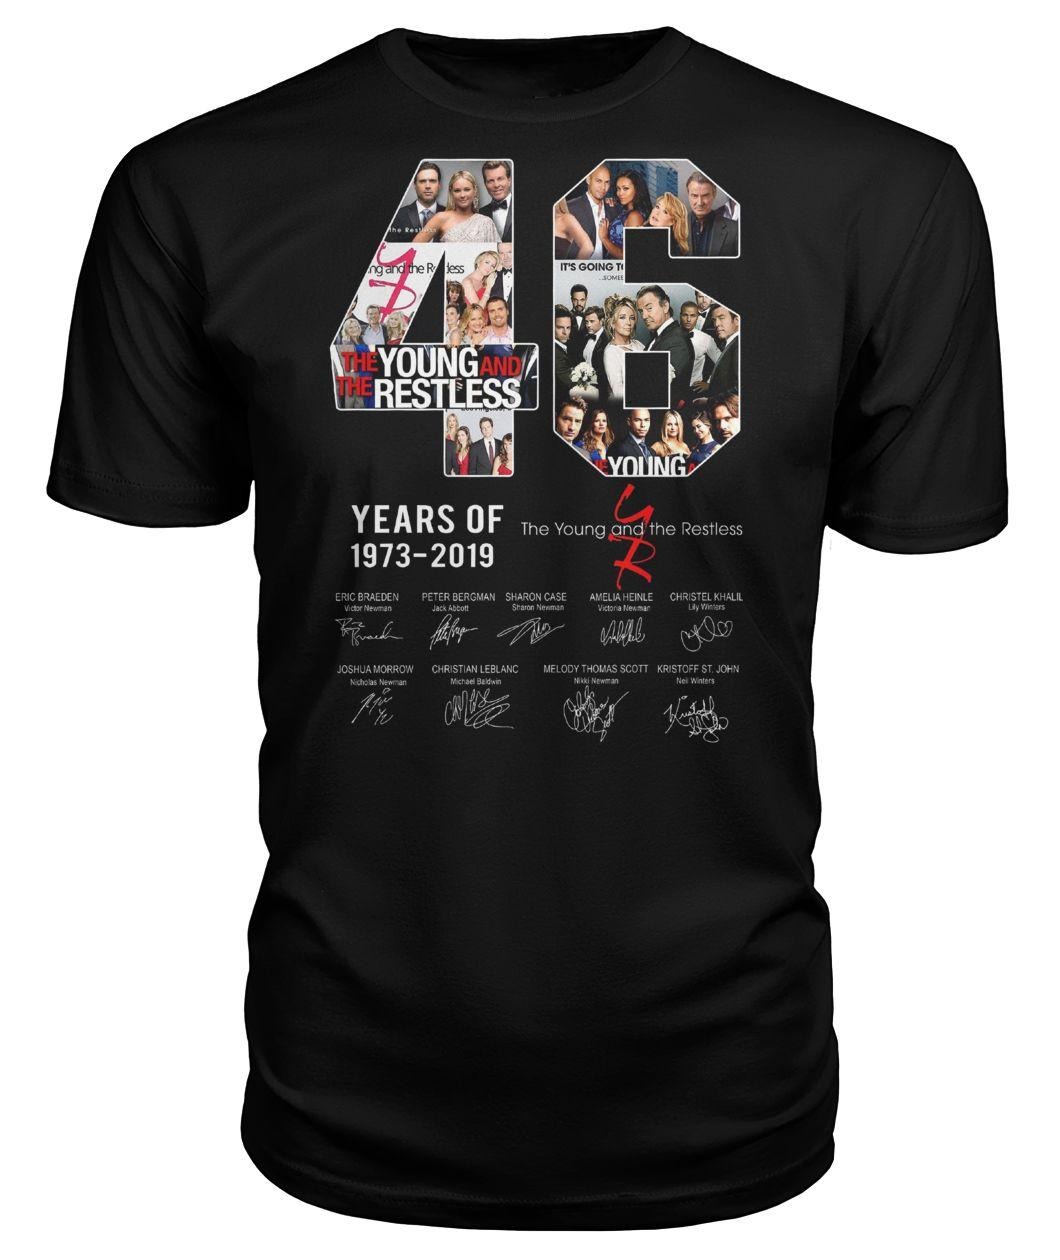 46 years of the Young and the Restless classic shirt